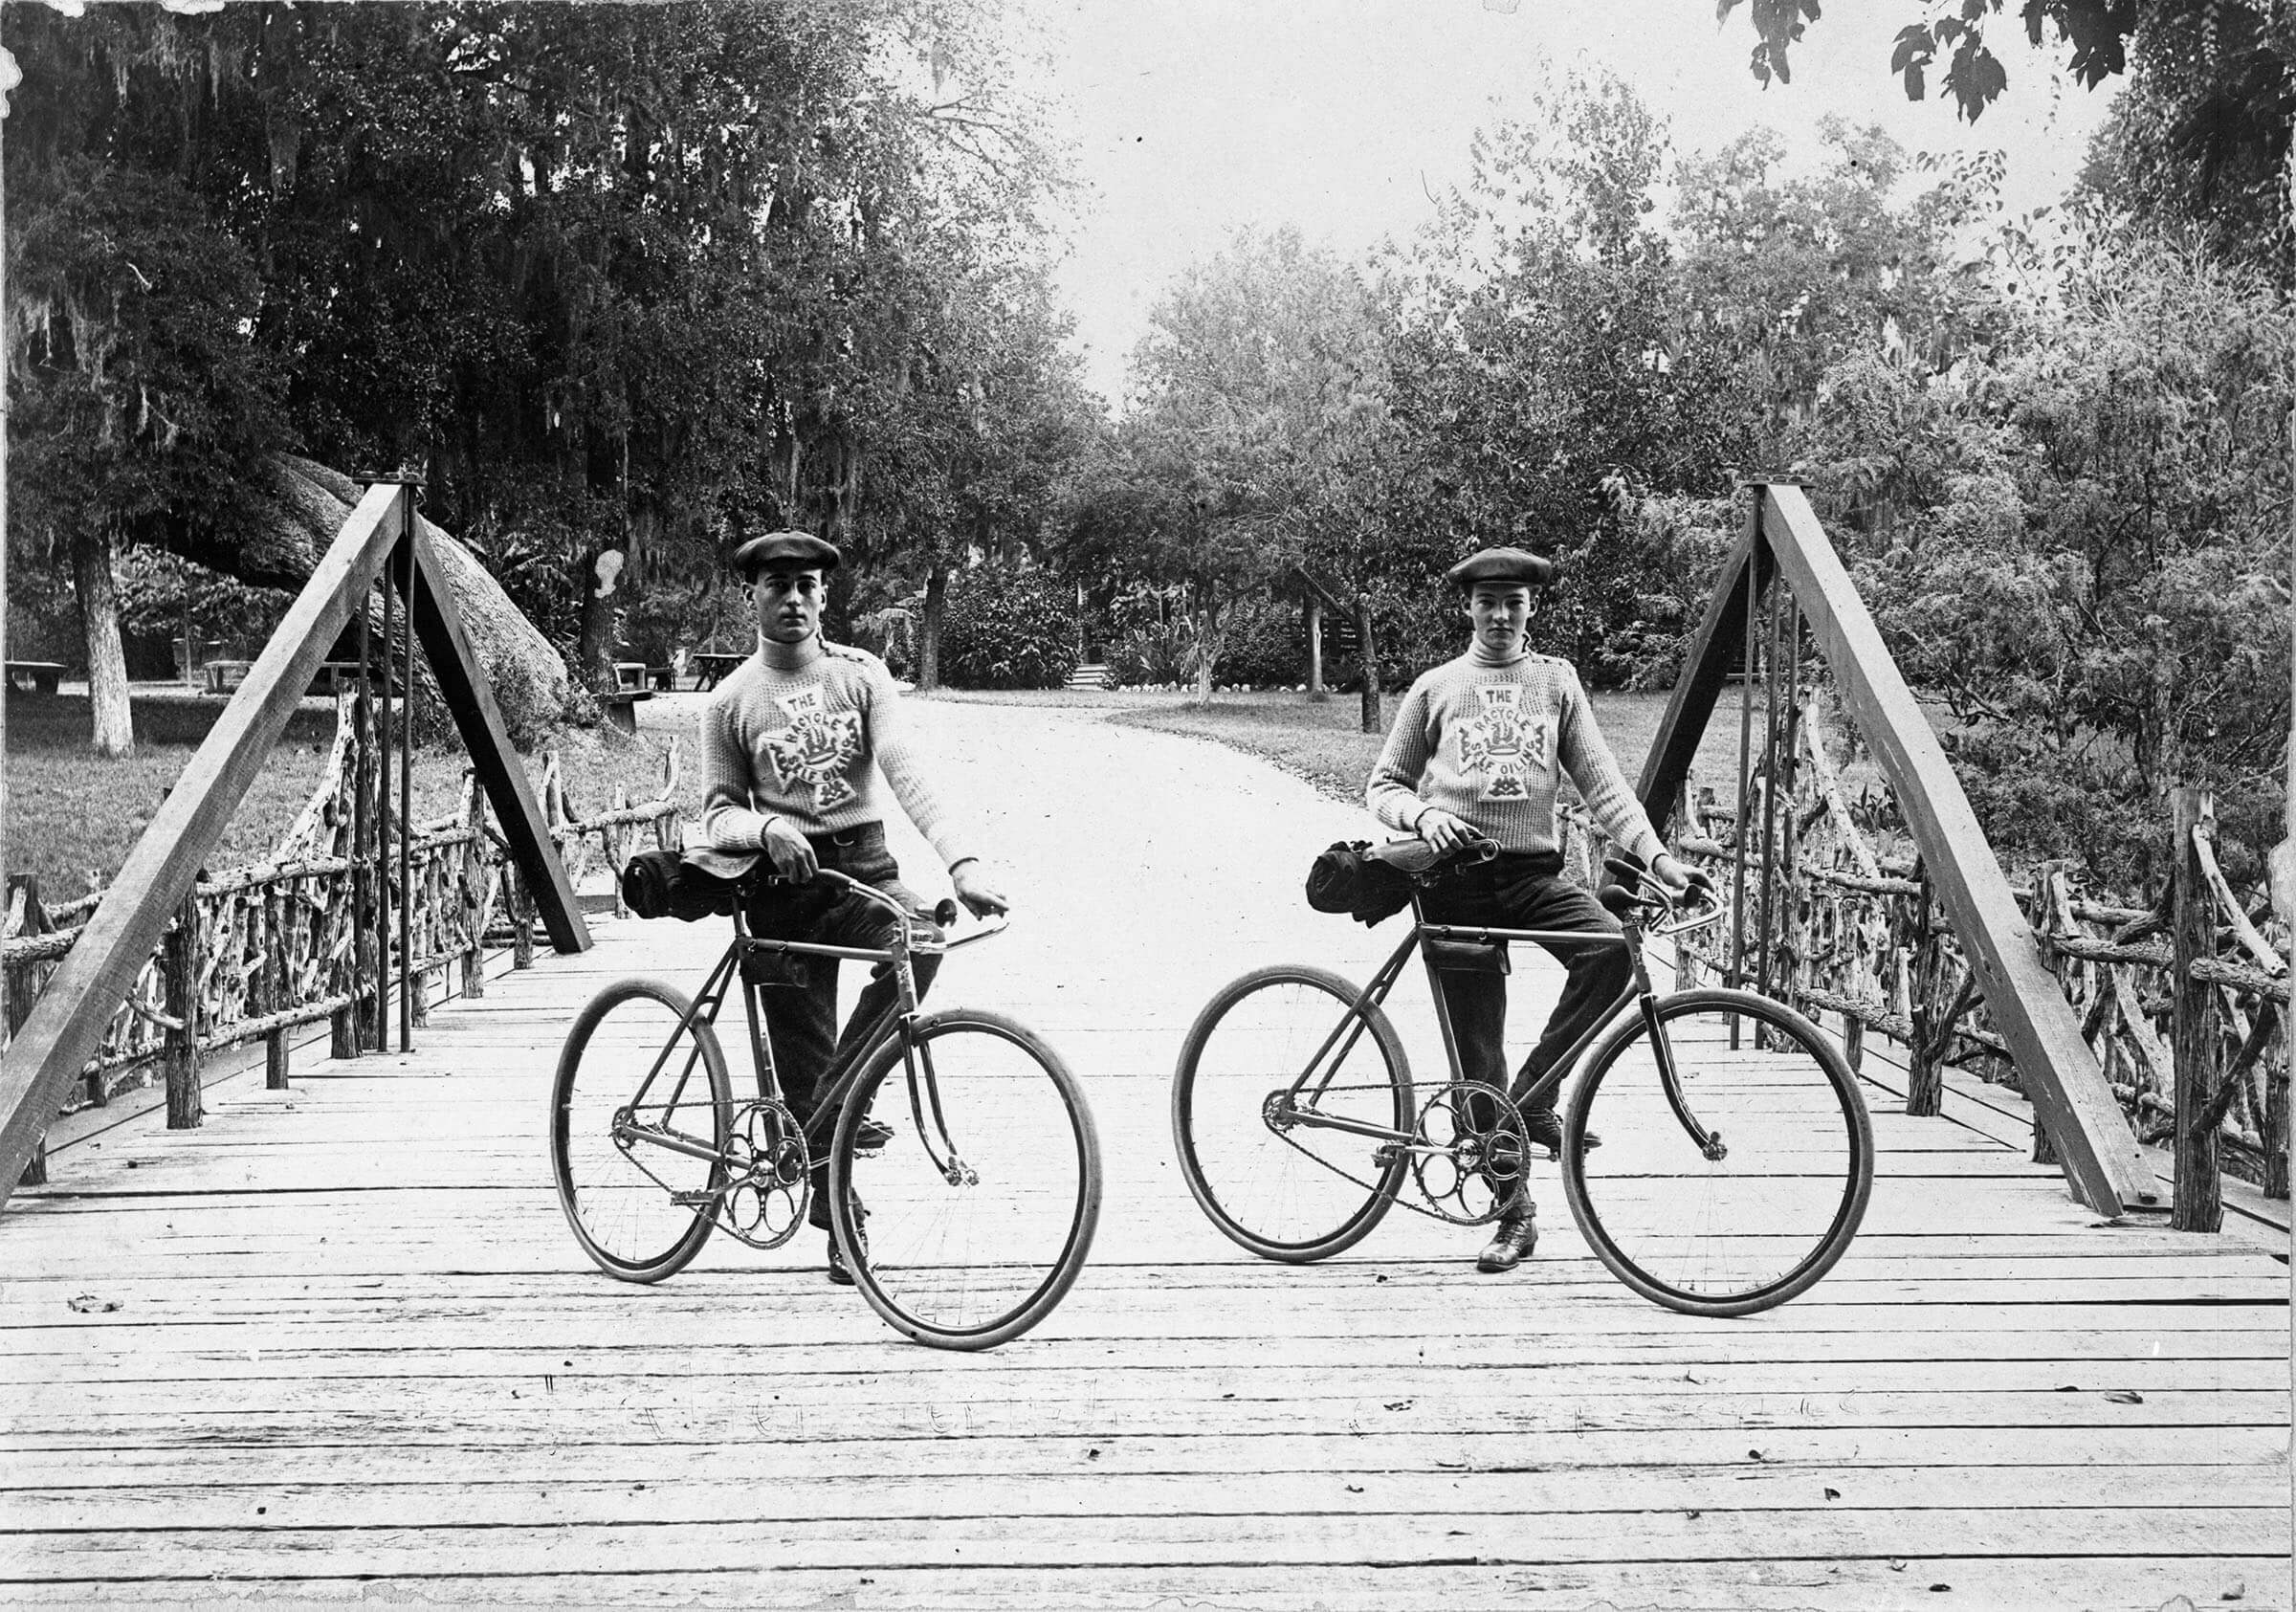 Two men stand on bicycles on a wooden bridge